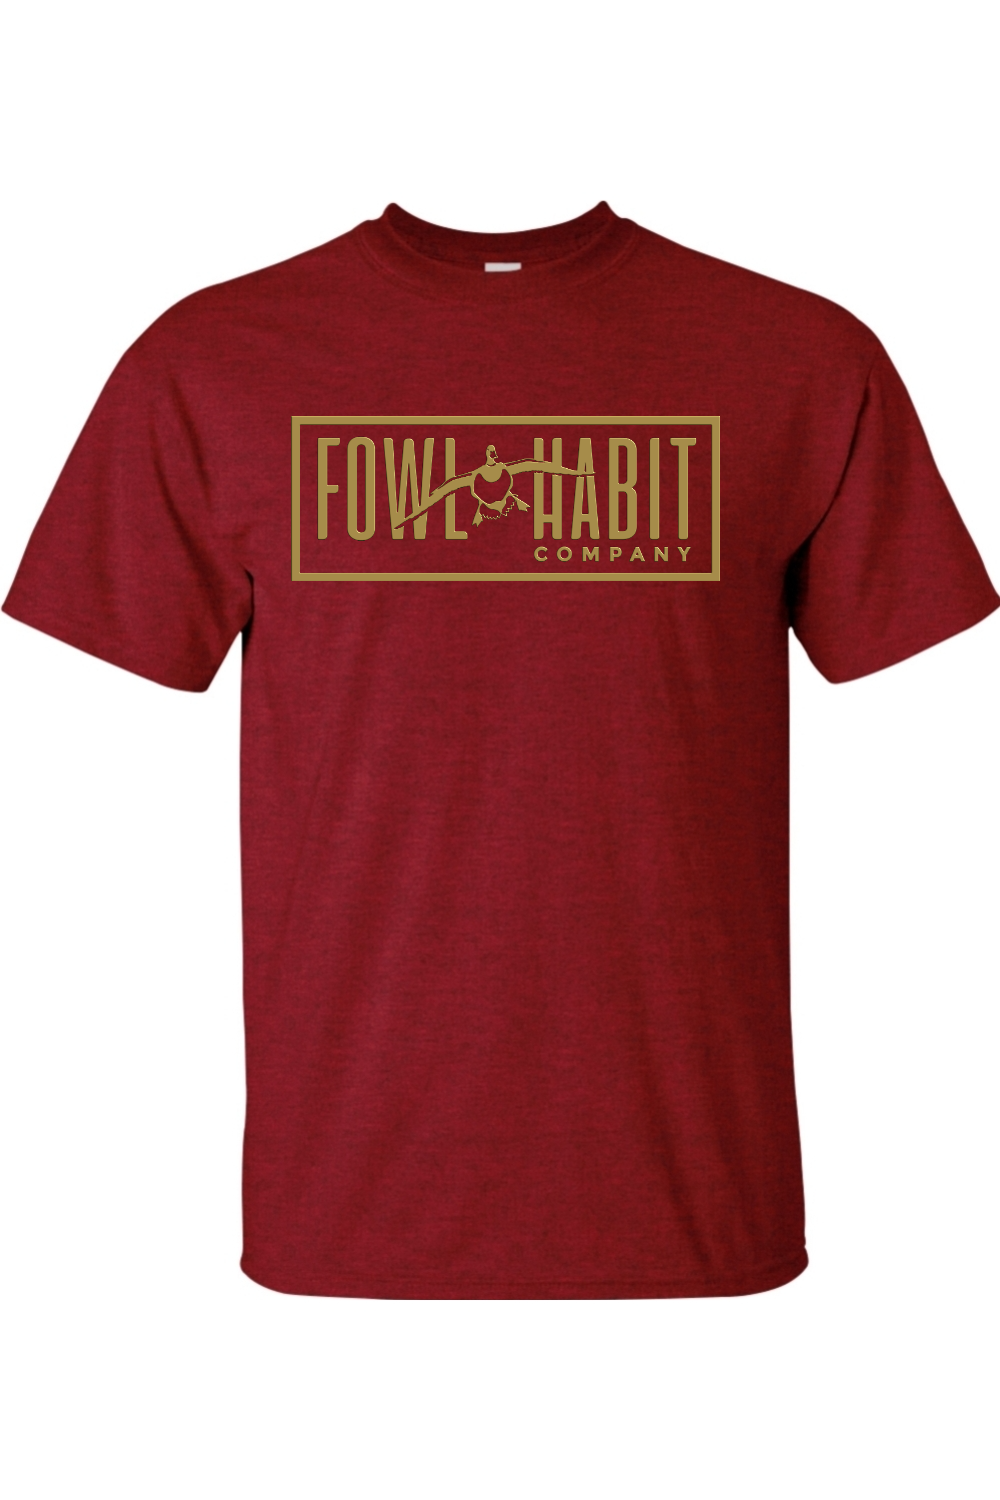 Cupped Up T-Shirt - Fowl Habit Co.